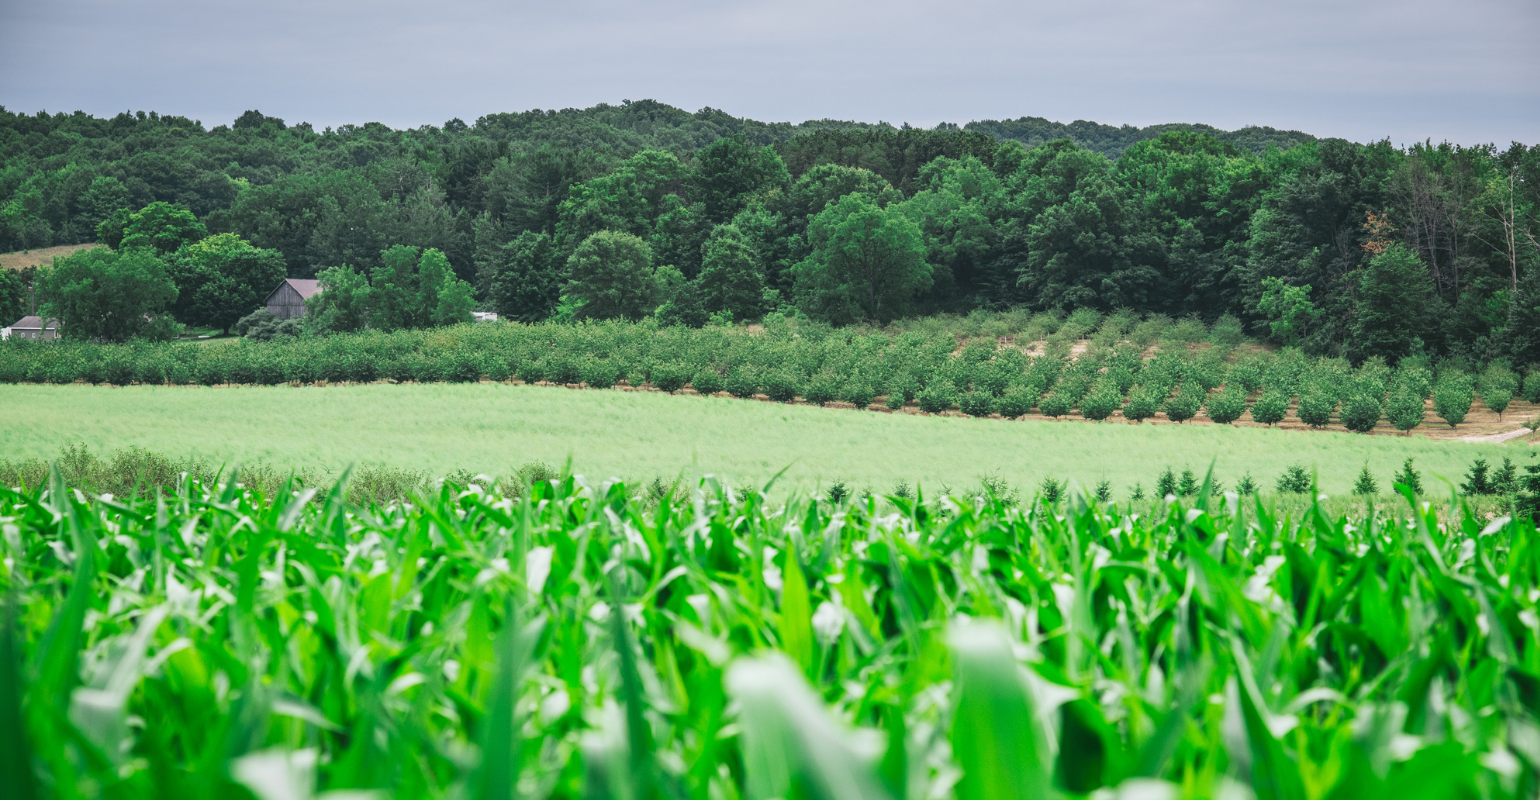 An image of a field with several crops